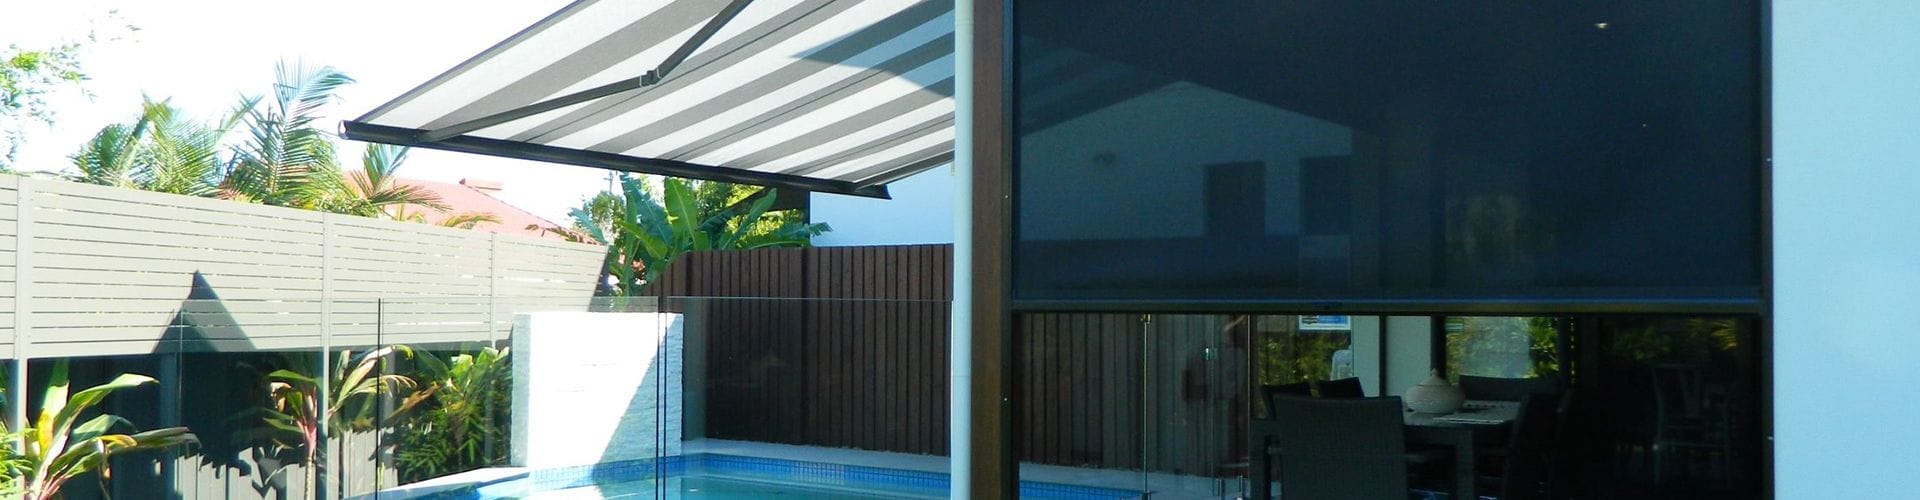 Gold Coast blinds, awnings and shutters